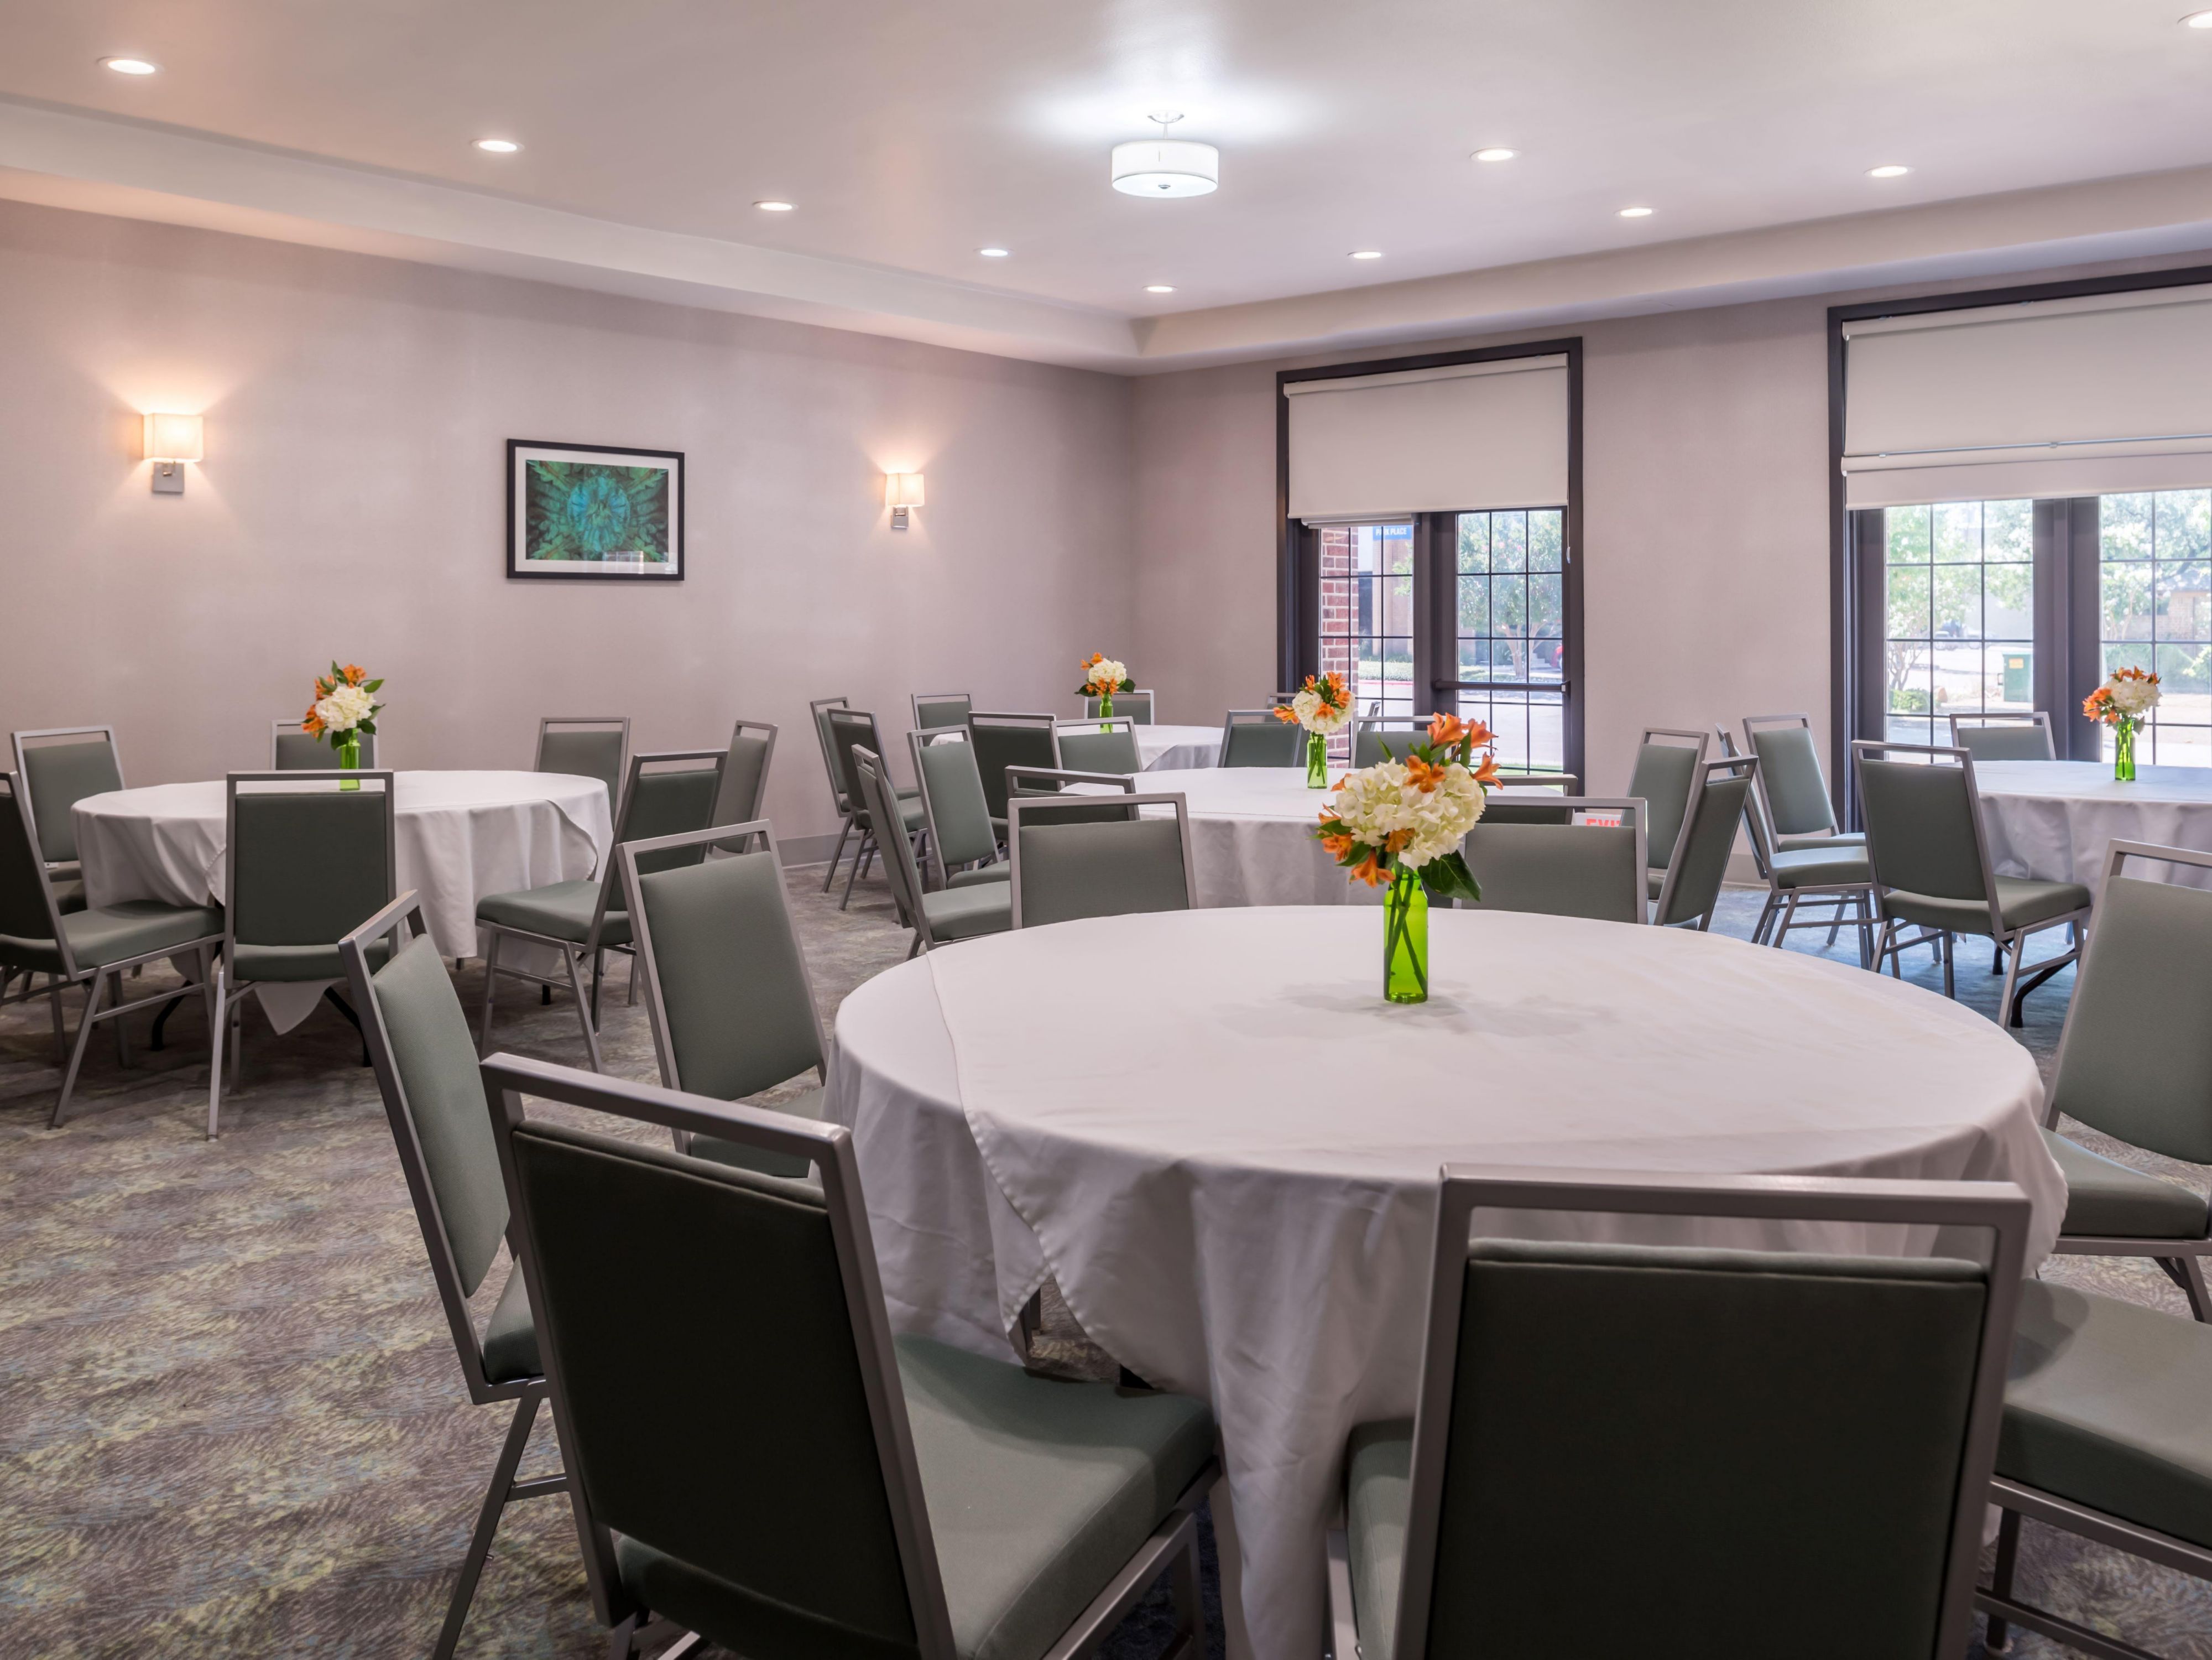 Our 1,200 square feet of flexible space coupled with our hotel's North Dallas location make us the perfect place to host a meeting or gathering. The room can accommodate events for up to 70 people.